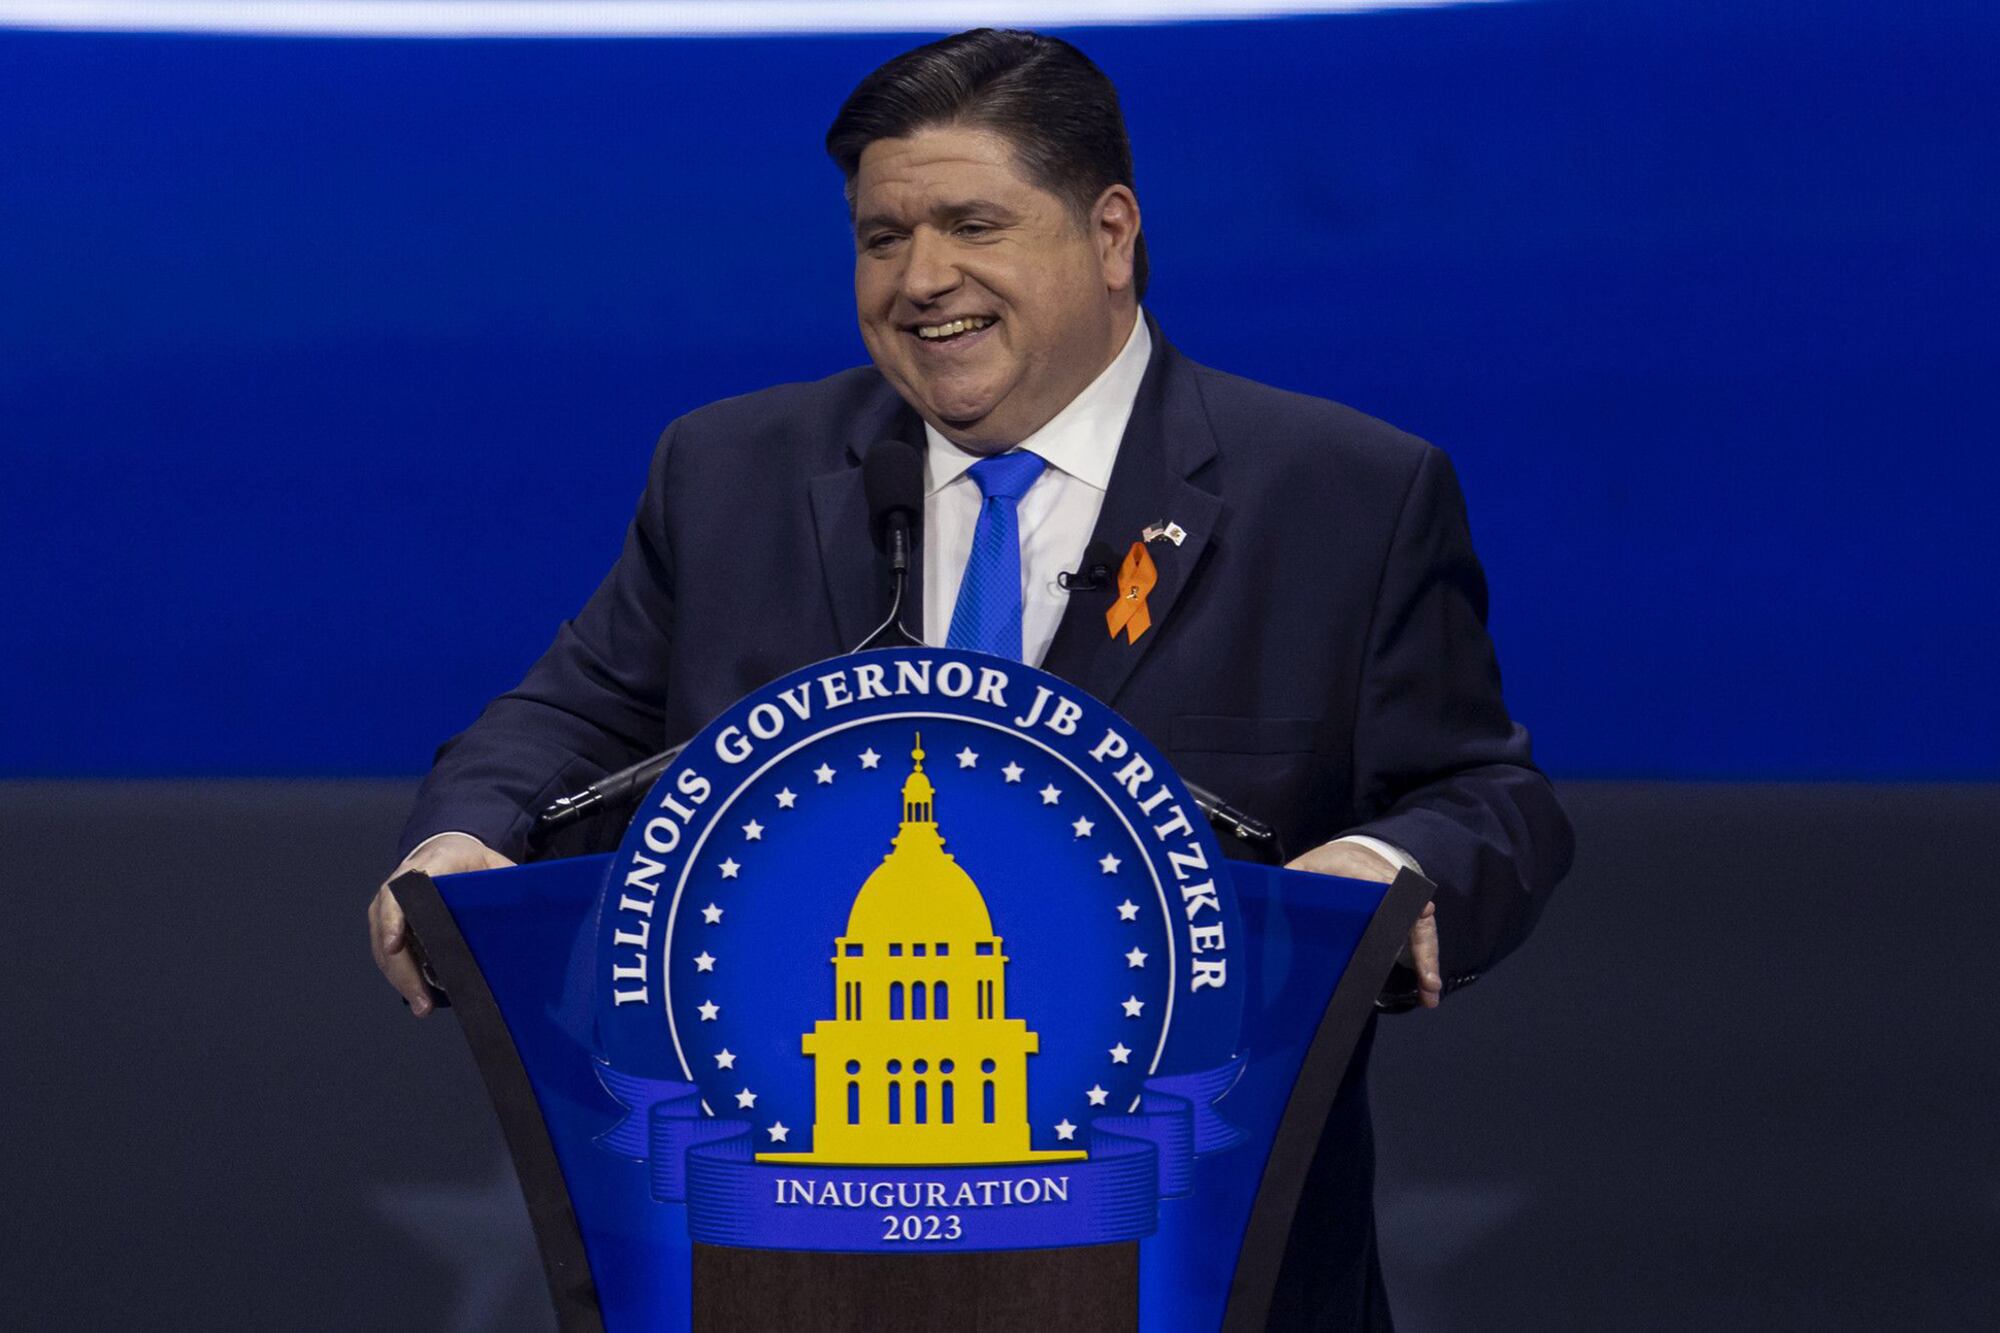 A man with short dark hair stands at a podium with an emblem in the front and a blue background.